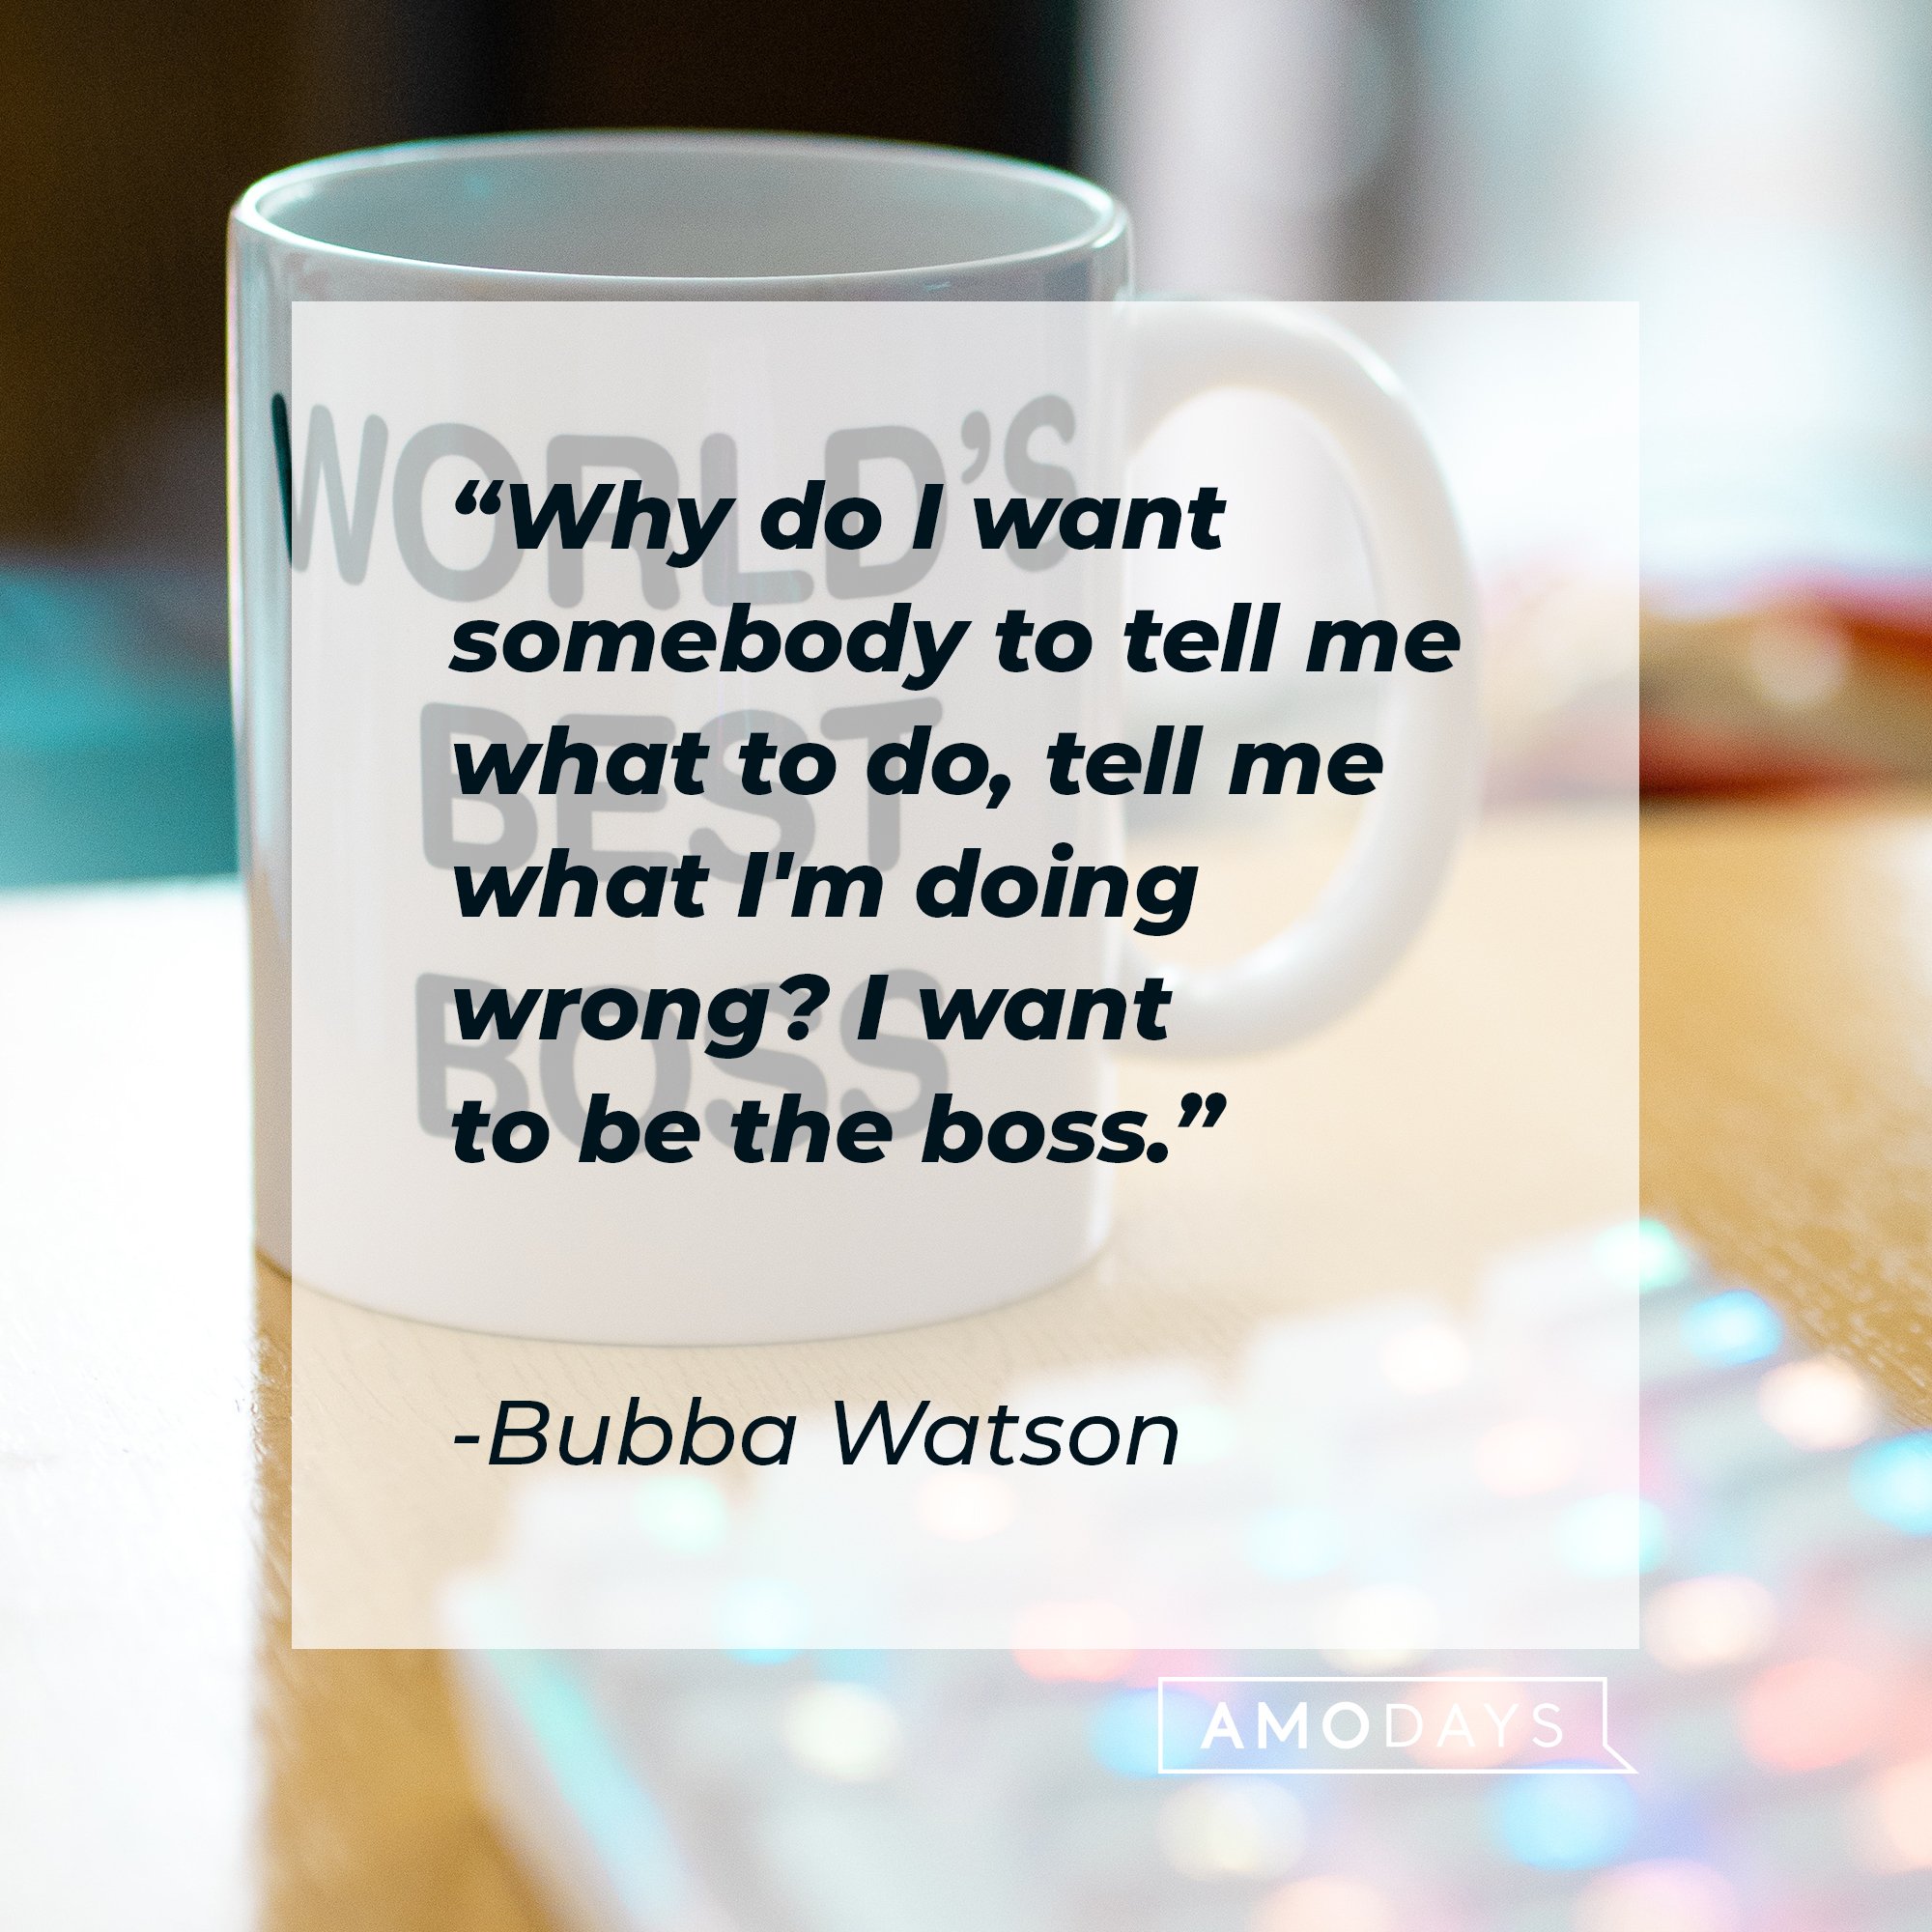 Bubba Watson’s quote: "Why do I want somebody to tell me what to do, tell me what I'm doing wrong? I want to be the boss." | Image: AmoDays